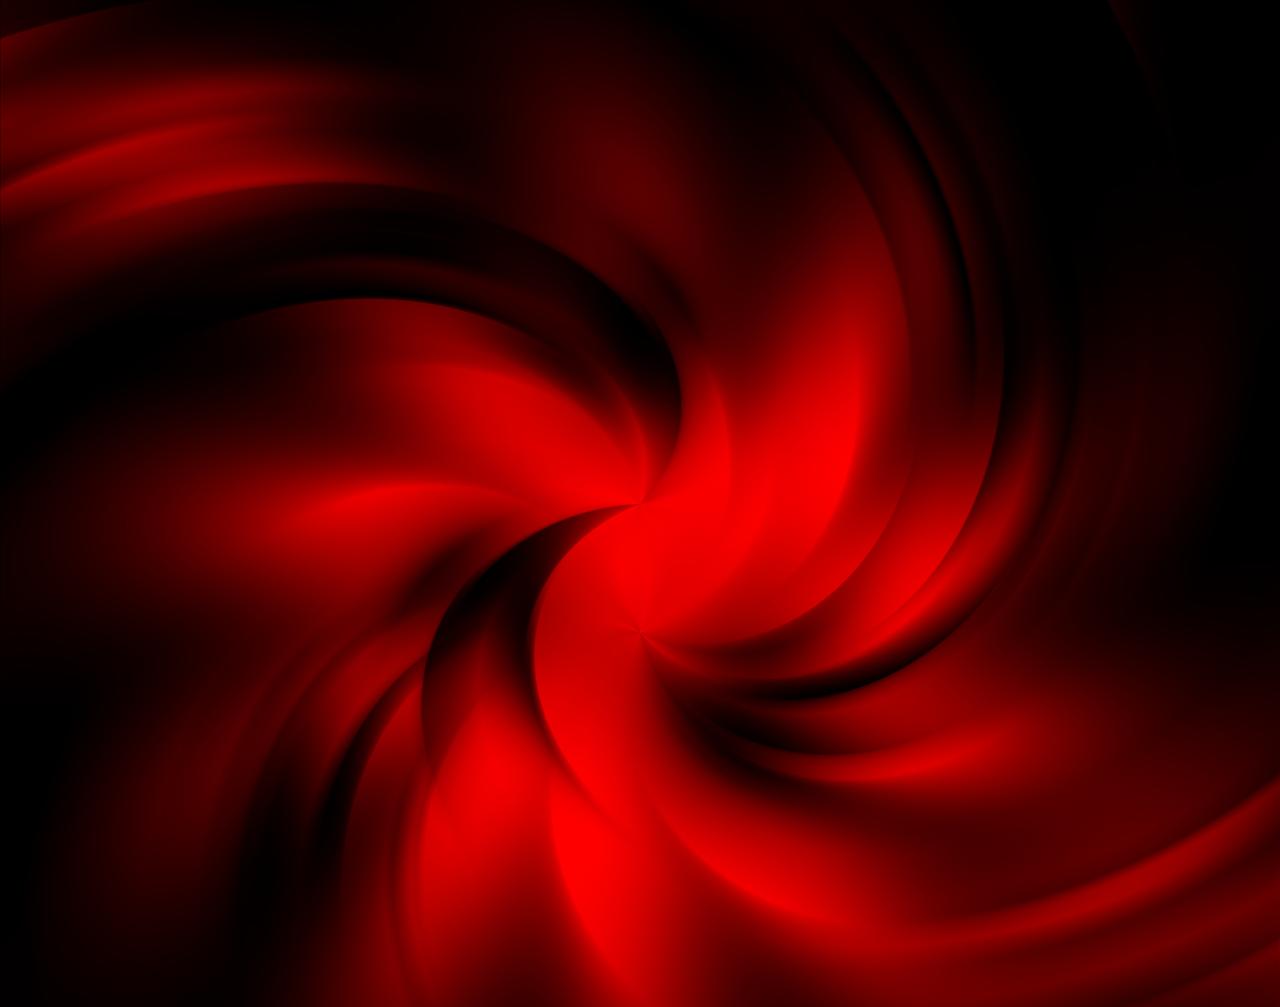 2009 wallpaper background black and red